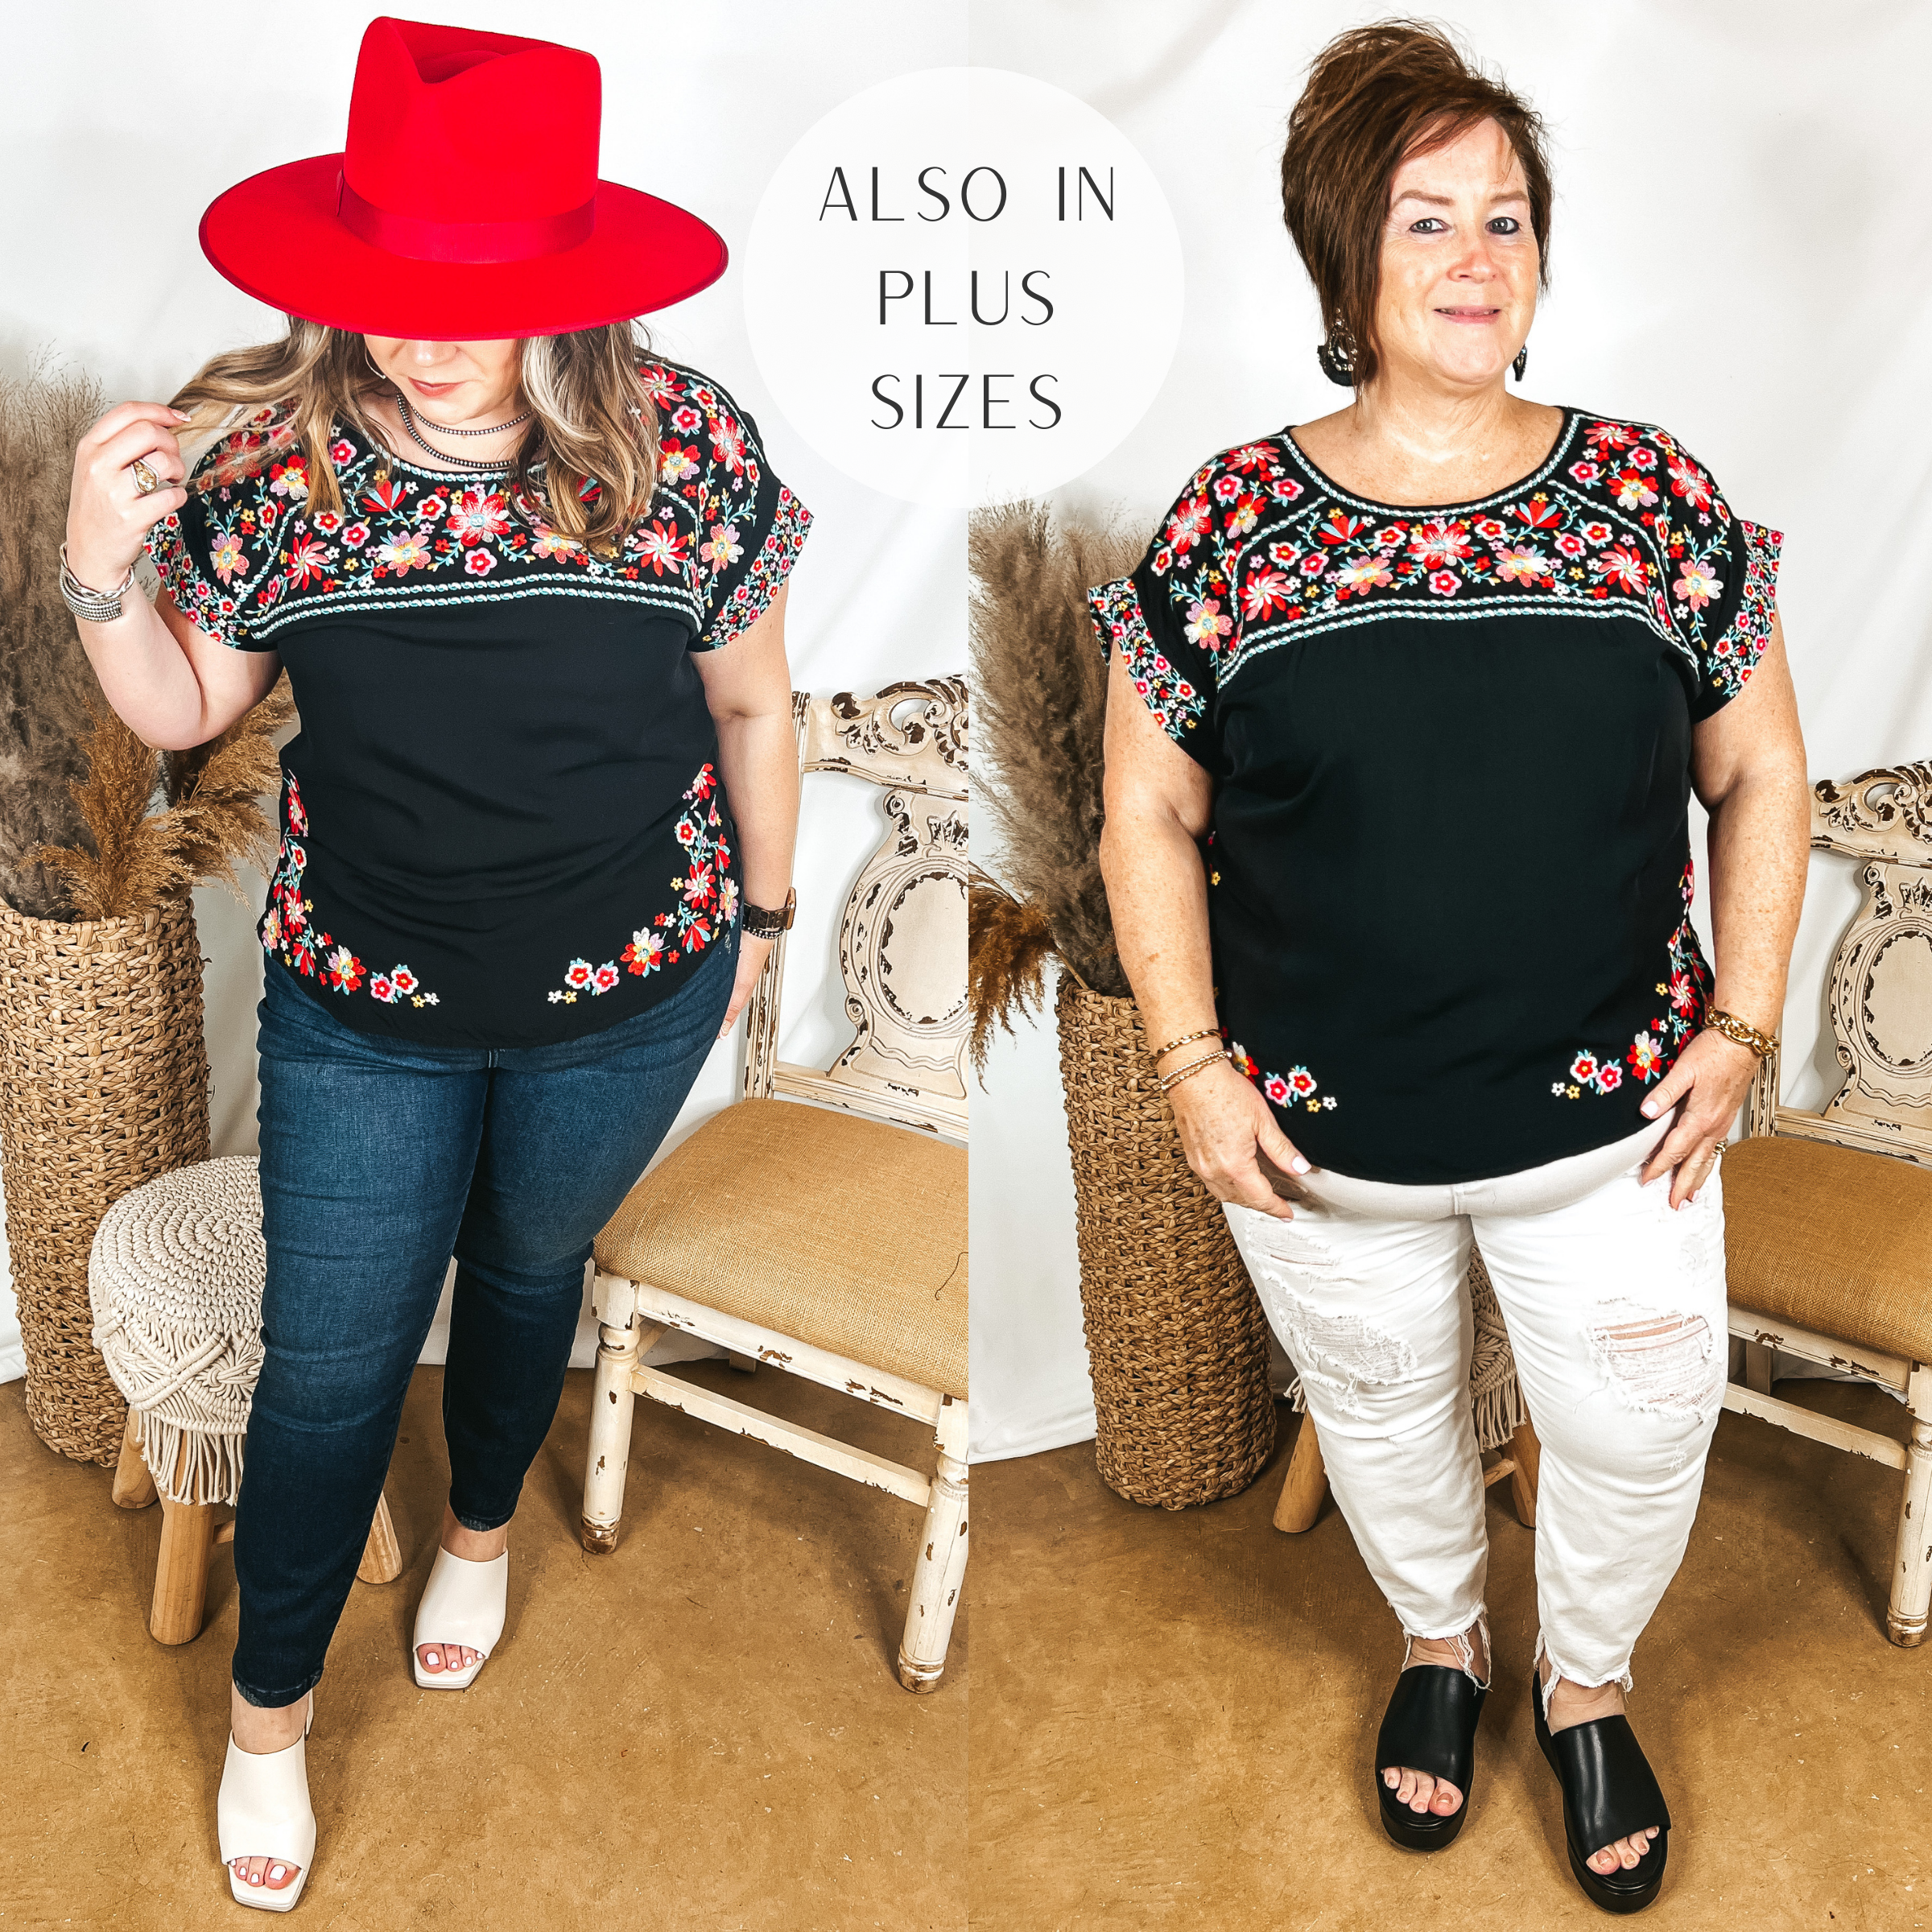 Models are Wearing a black top that has floral embroidery. Size large model has it paired with dark wash jeans, white heels, and a red hat. Plus size model has it paired with white skinny jeans, black sandals, and black jewelry.